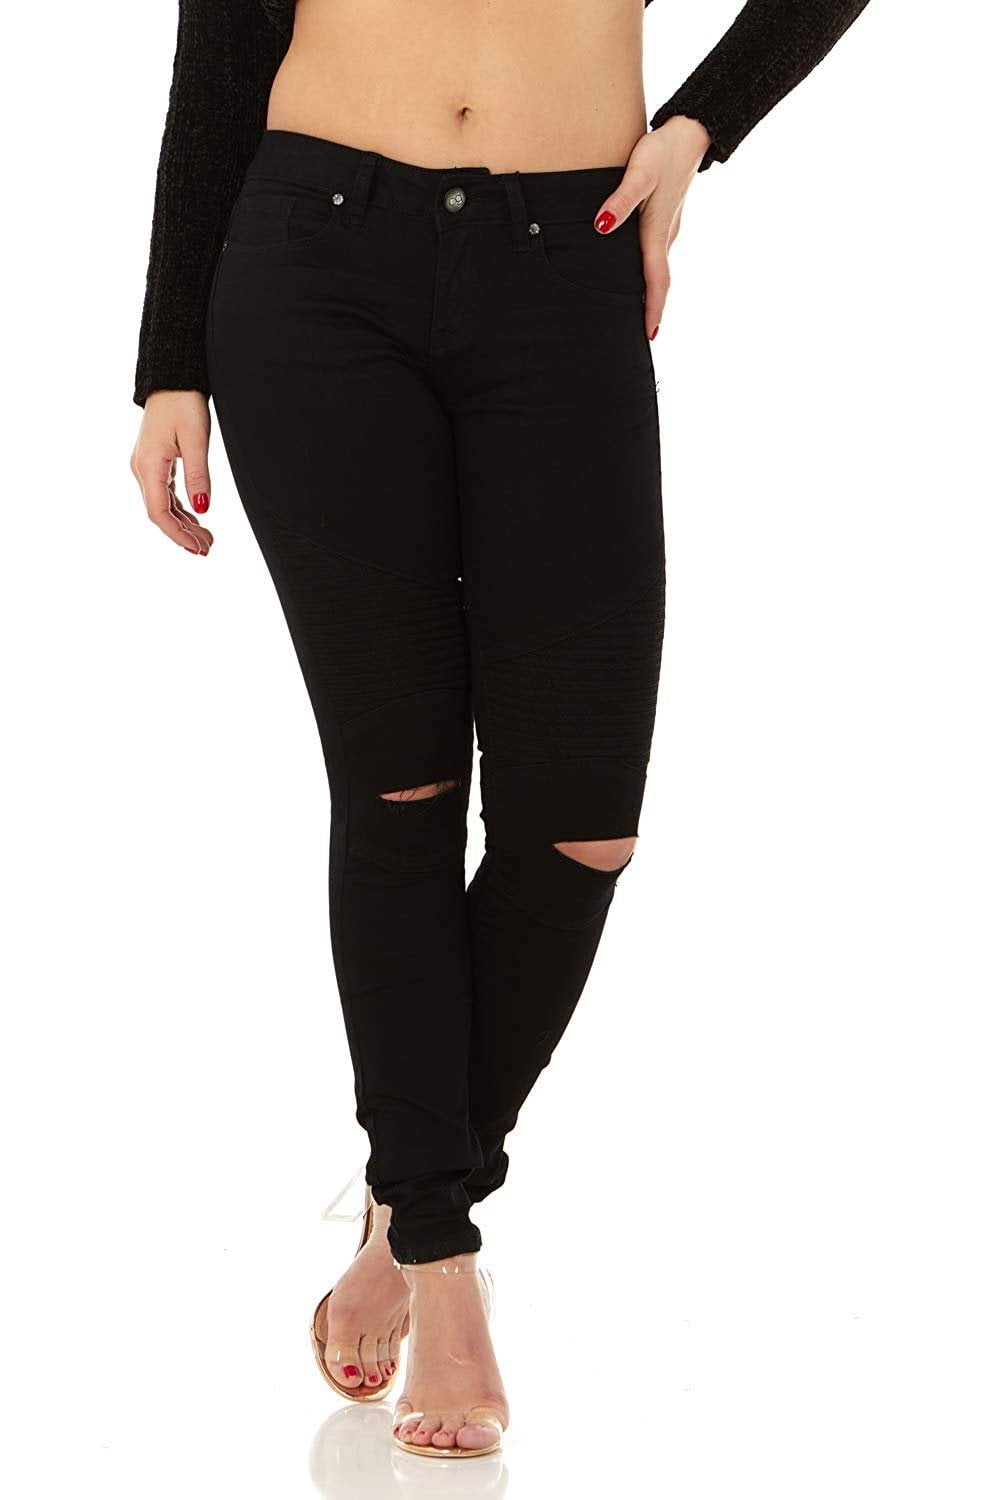 Womens Black Ripped Jeans Skinny Sizes 6-14 Ladies 